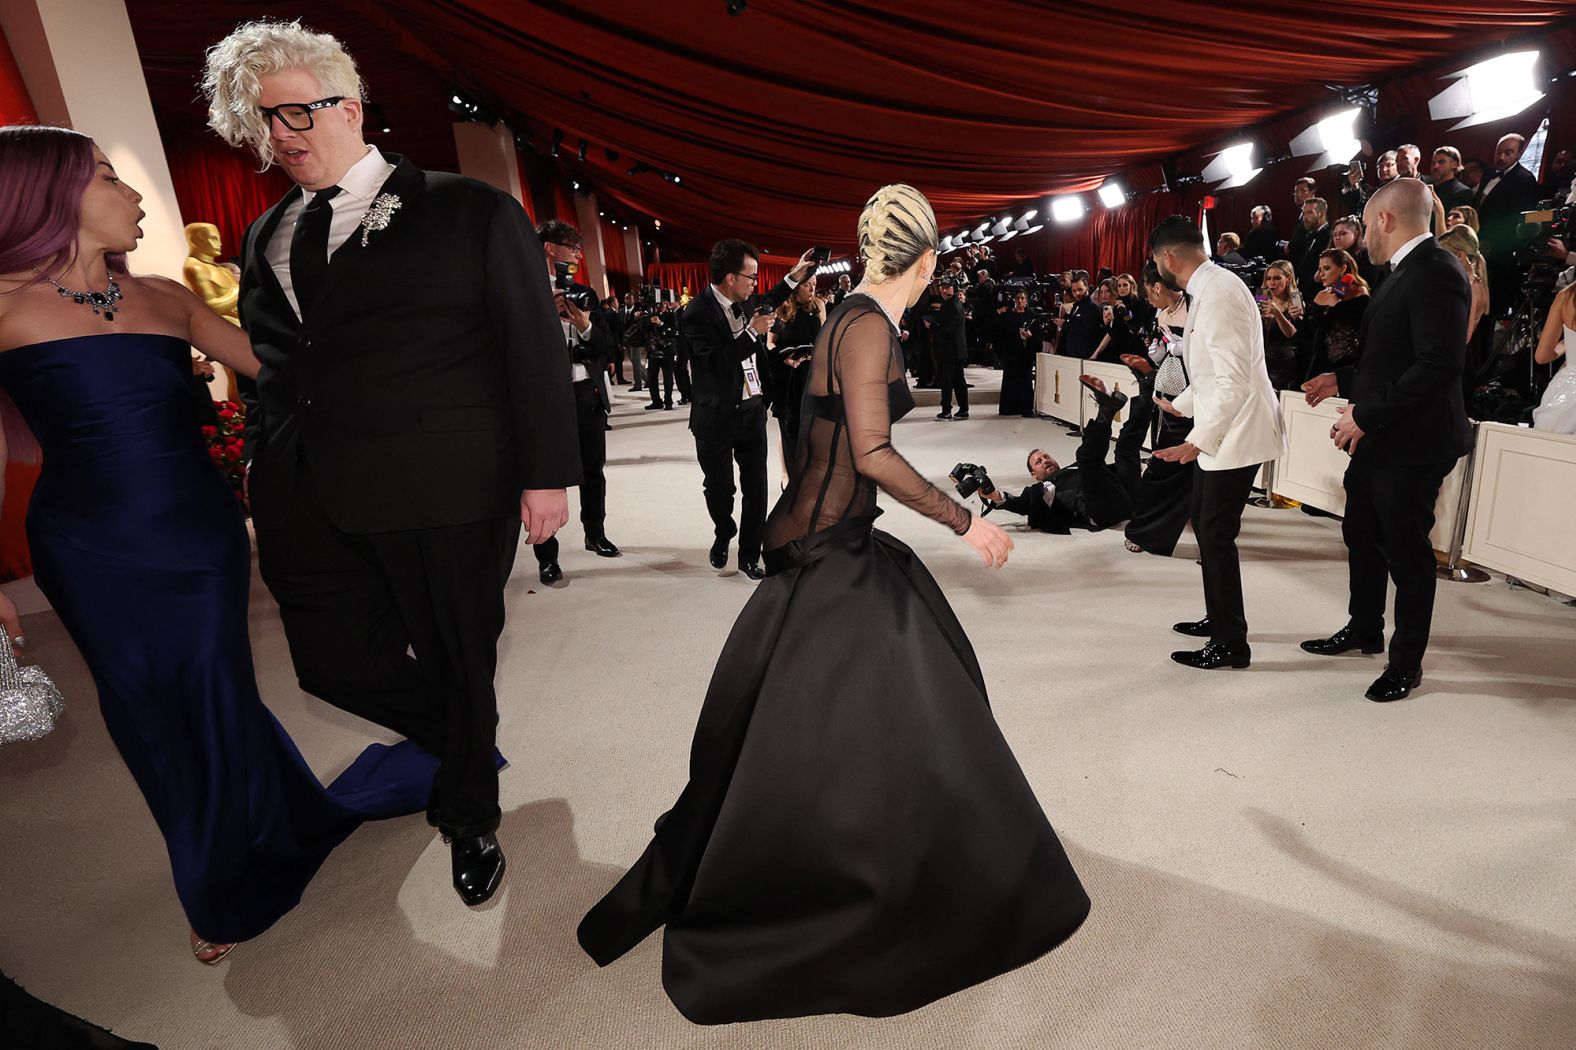 Lady Gaga looks back at a photographer who fell on the champagne-colored <a href="index.php?page=&url=https%3A%2F%2Fwww.cnn.com%2Fstyle%2Farticle%2Foscars-red-carpet-fashion-2023%2Findex.html" target="_blank">red carpet</a> ahead of the Academy Awards on Sunday, March 12. The singer went back to help the man up.